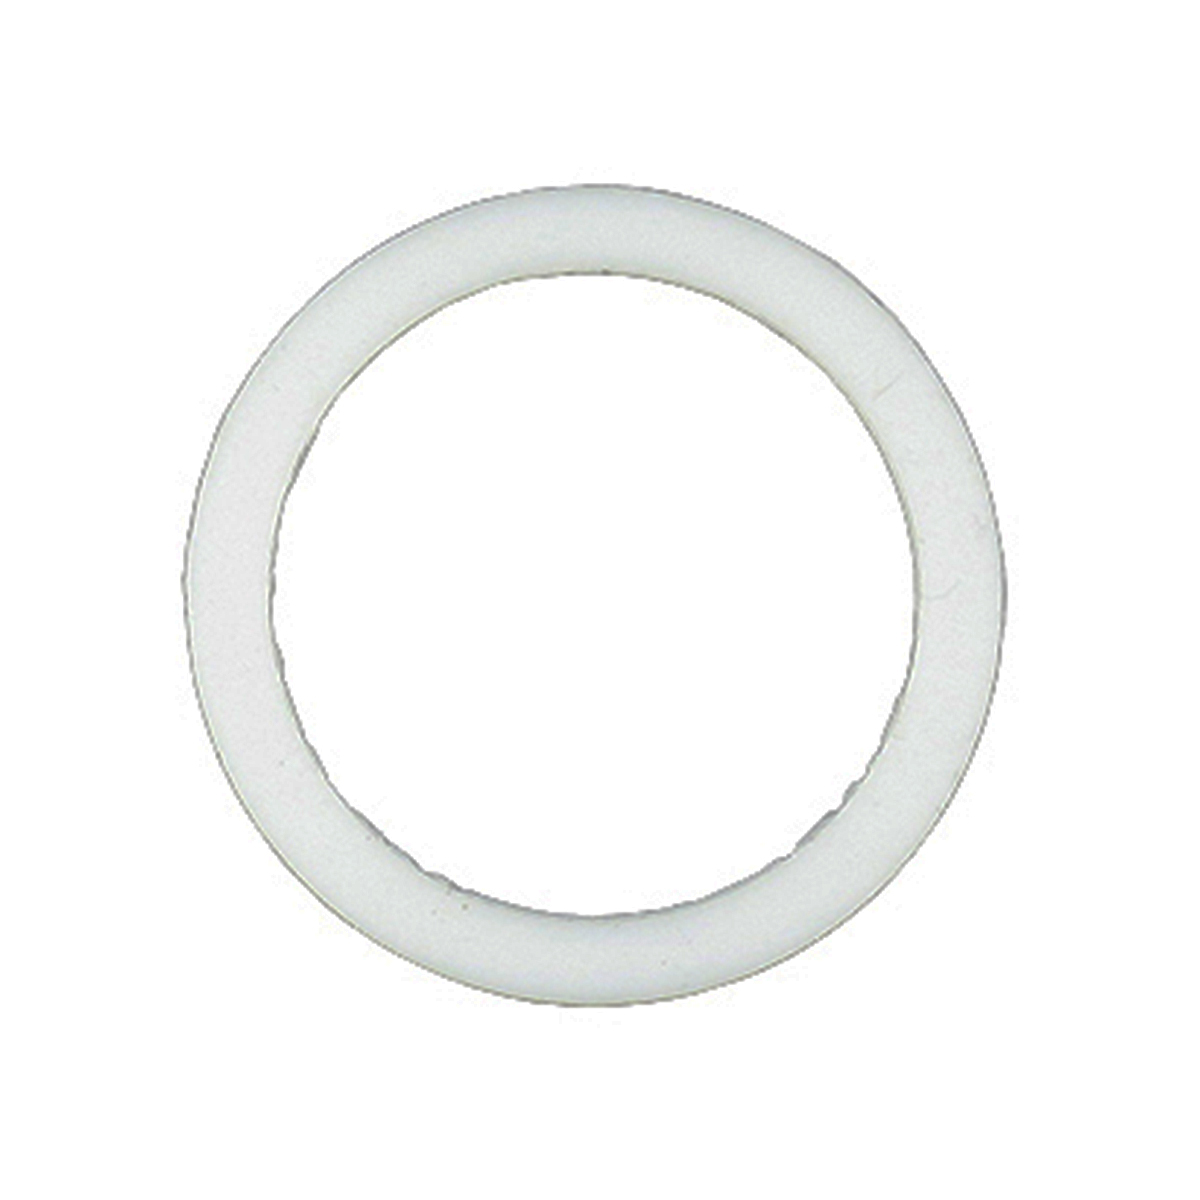 Spacers 2mm thk Bespoke Teflon PTFE Washer pick your own size upto 40mm dia 